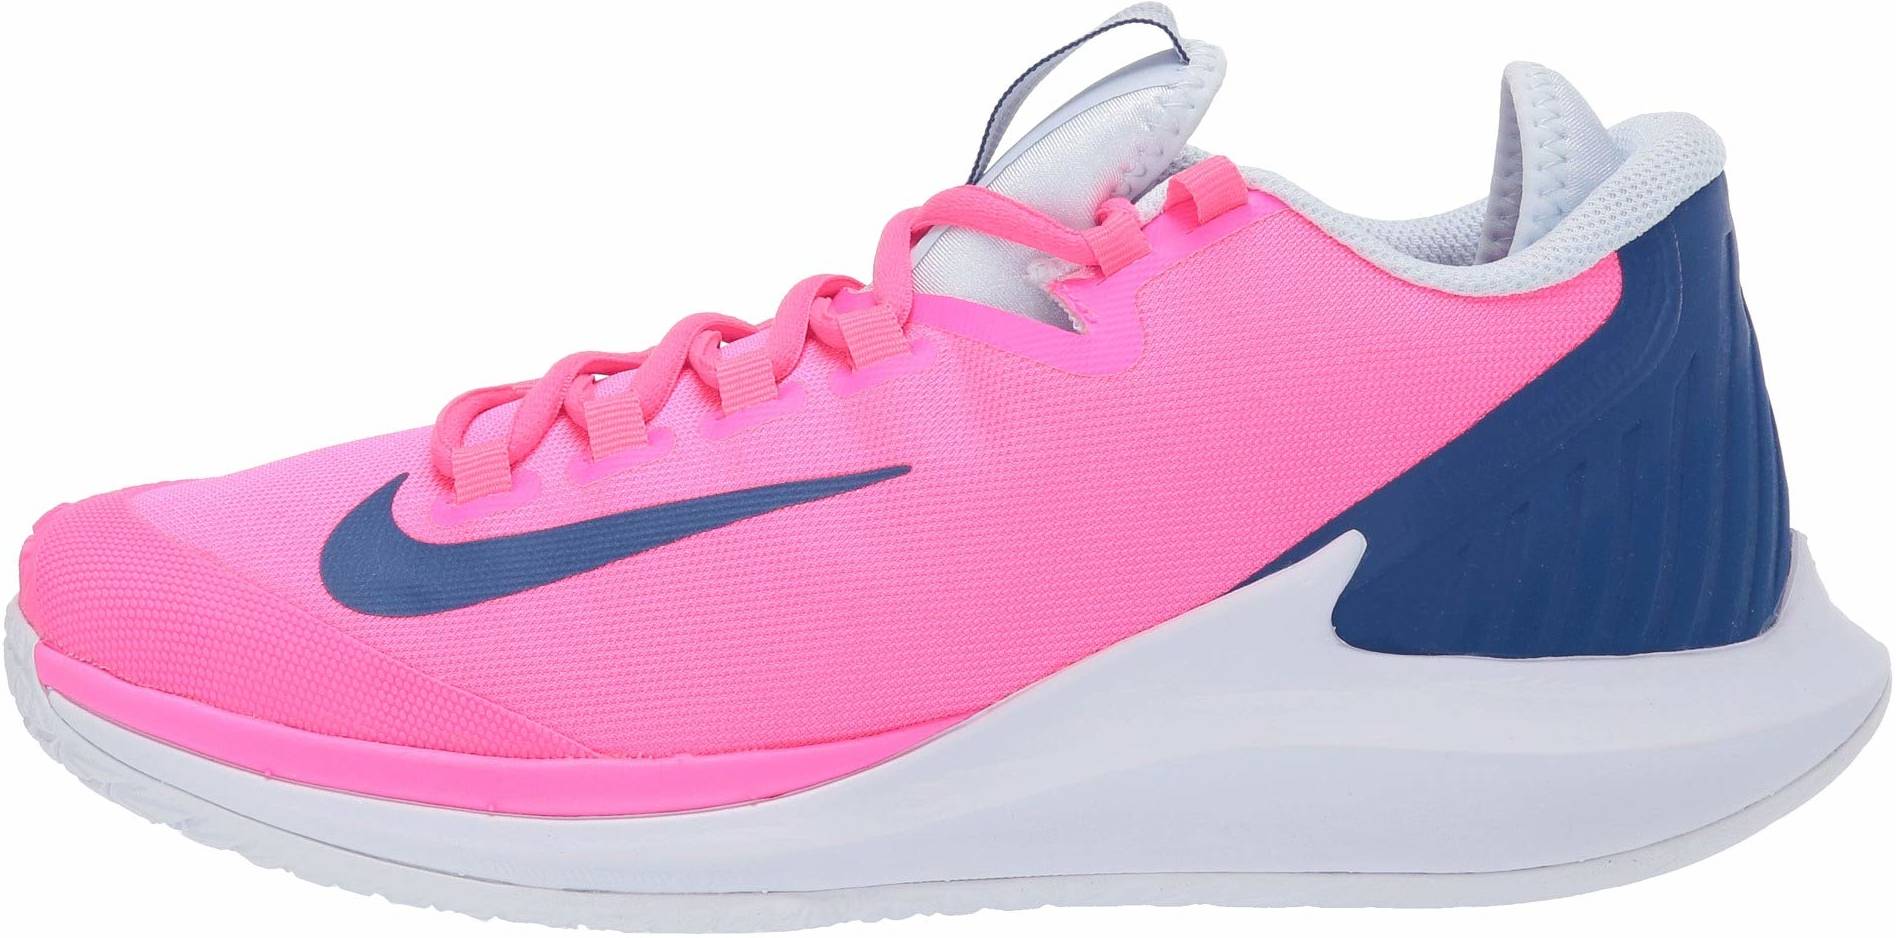 pink and white nike tennis shoes